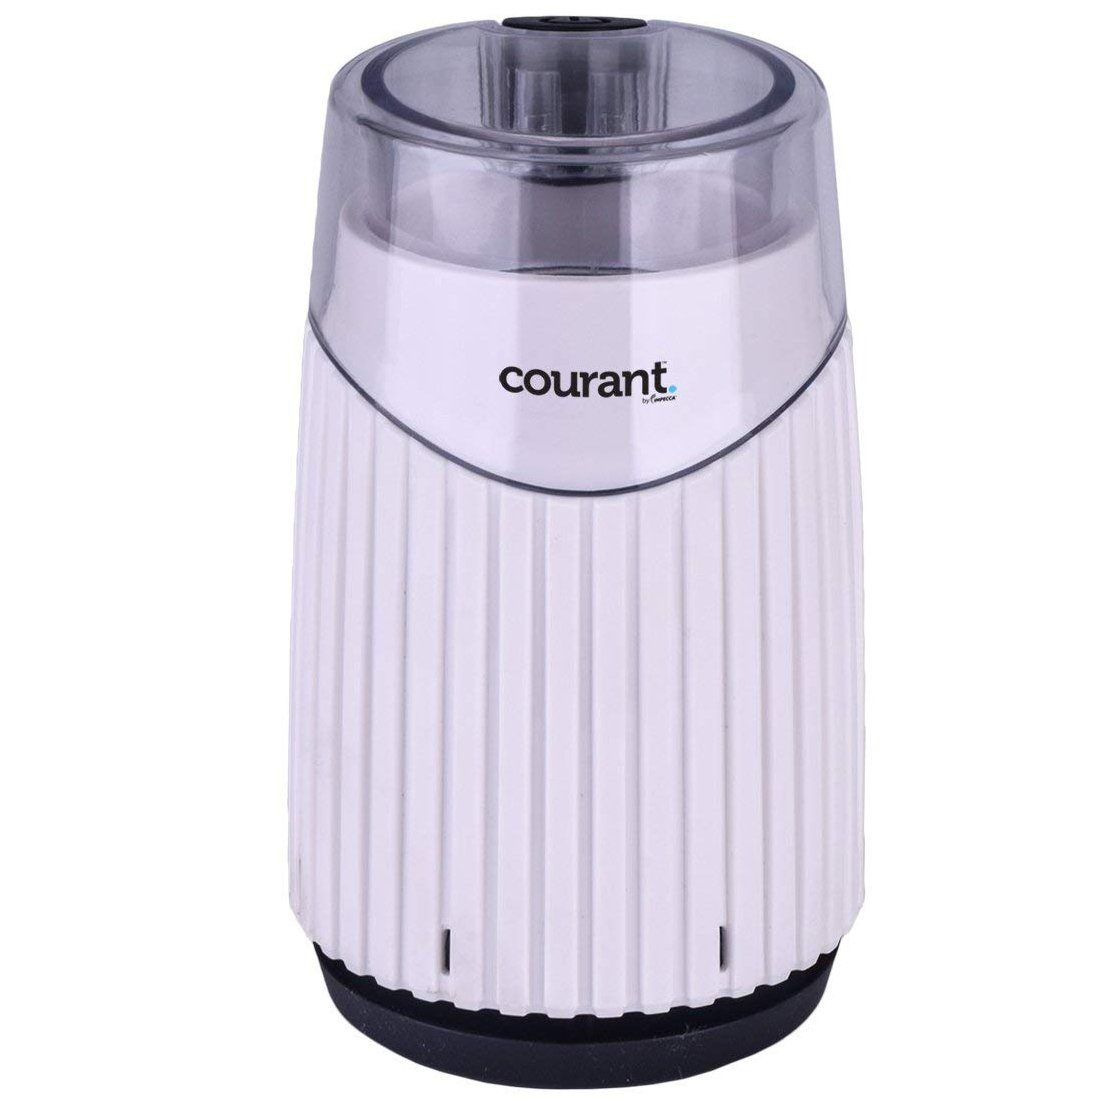 Courant Electric Motor Coffee Grinder - Assorted Colors / White